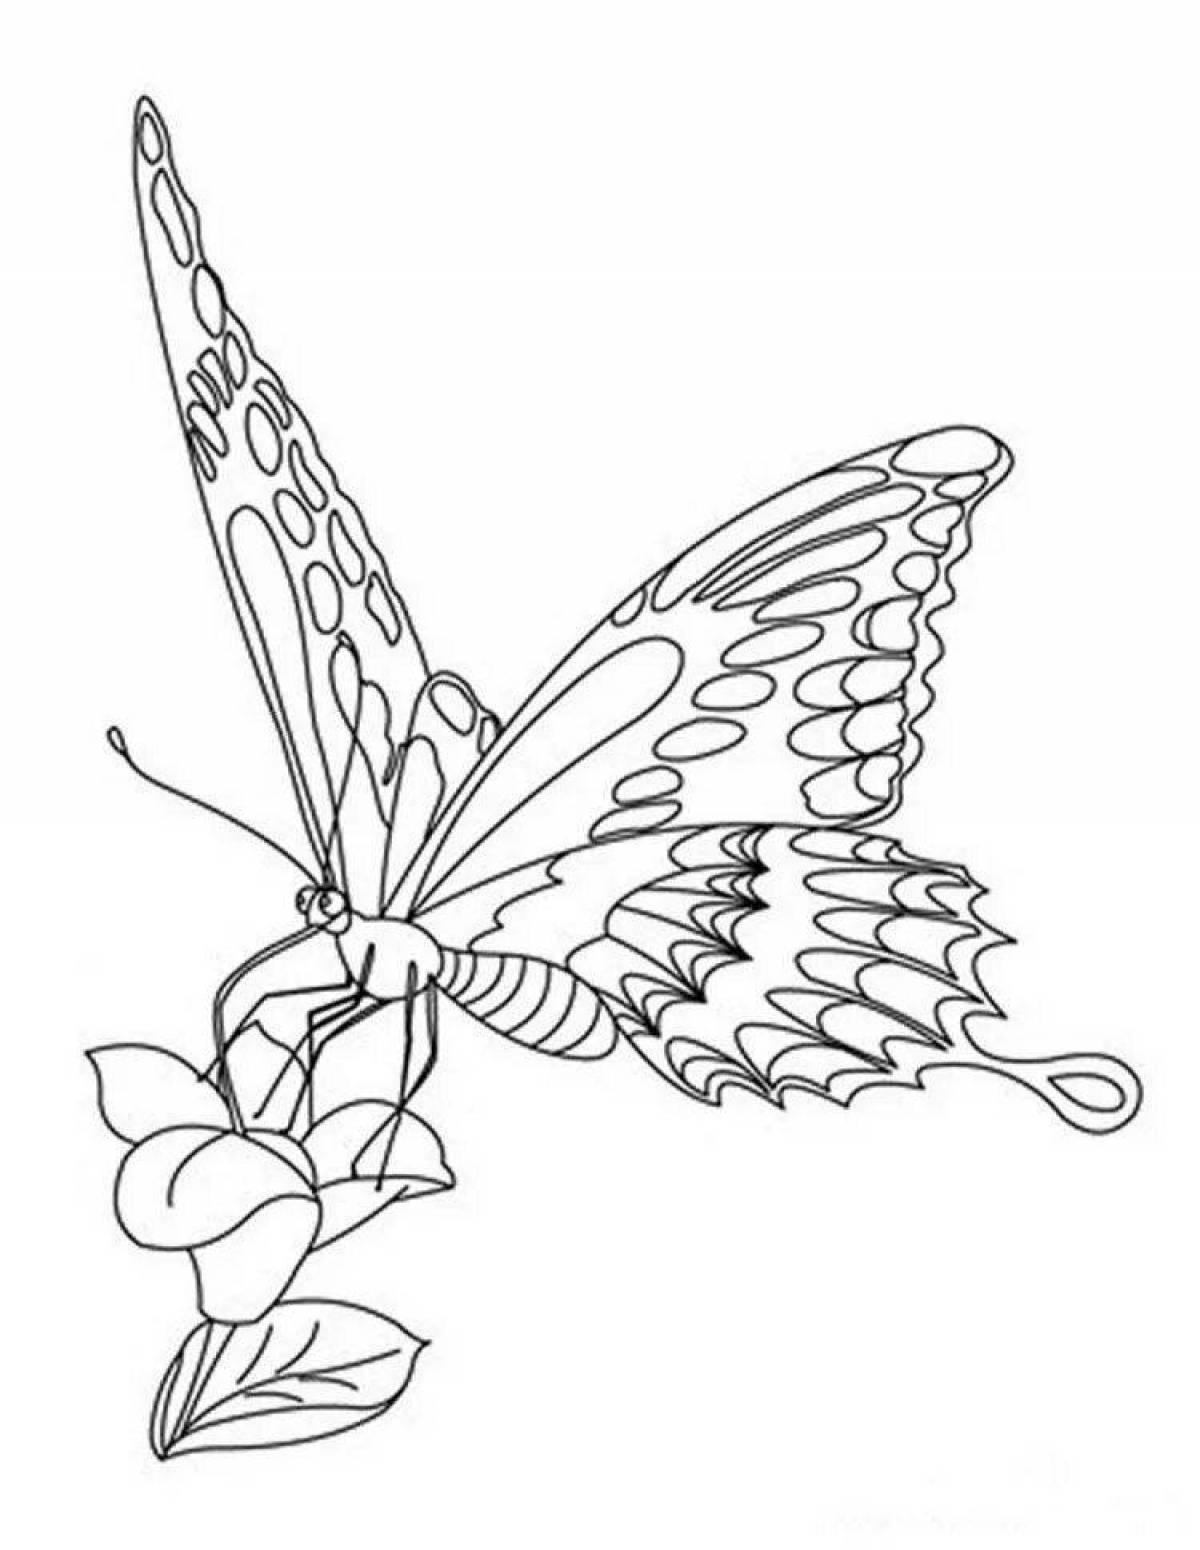 Glittering swallowtail butterfly coloring page